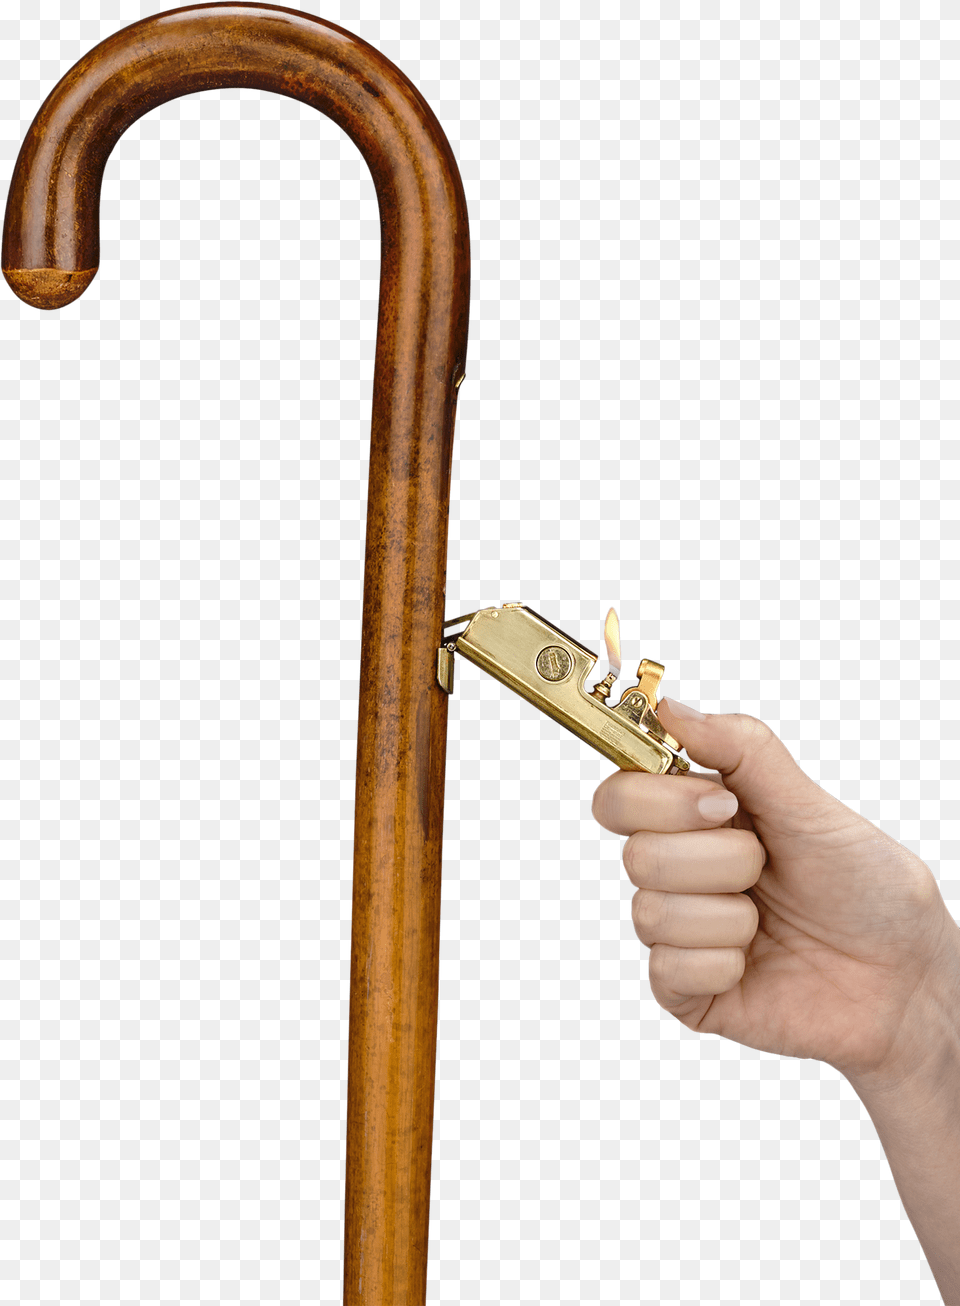 Cigar Lighter Cane Flask Canes With Hidden Features, Stick Png